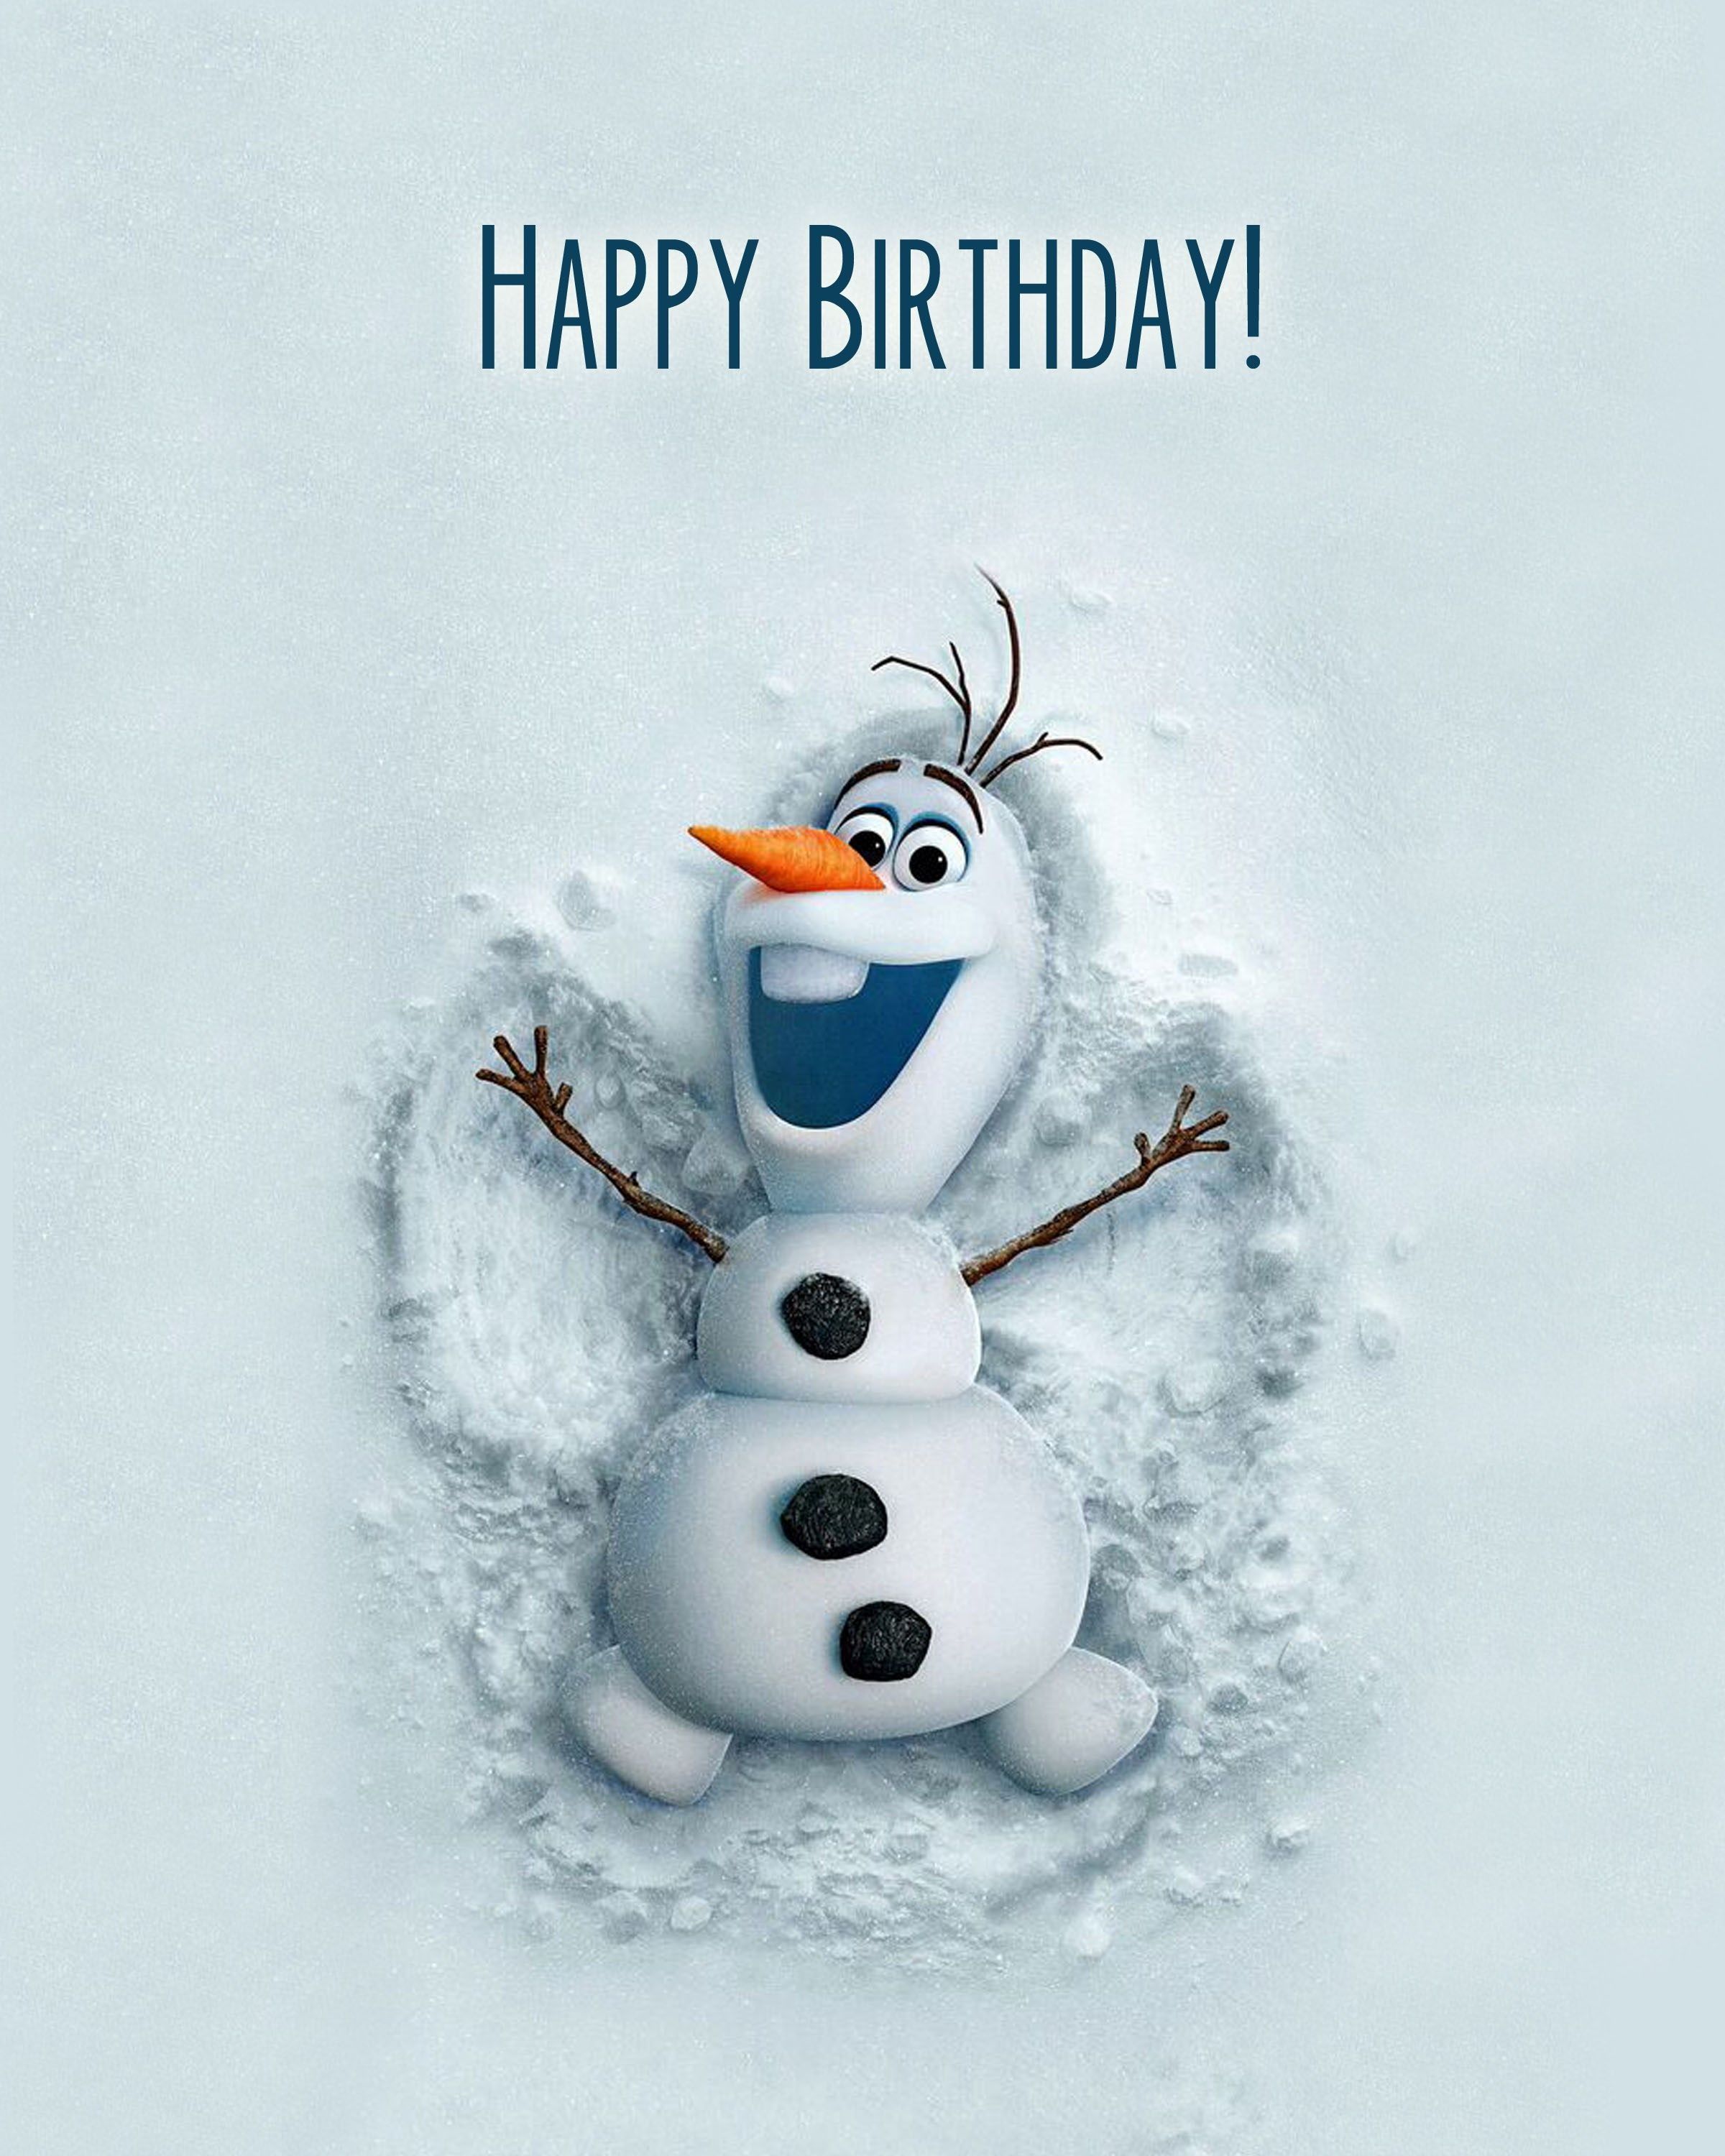 Olaf from Frozen makes a great birthday card! - Birthday